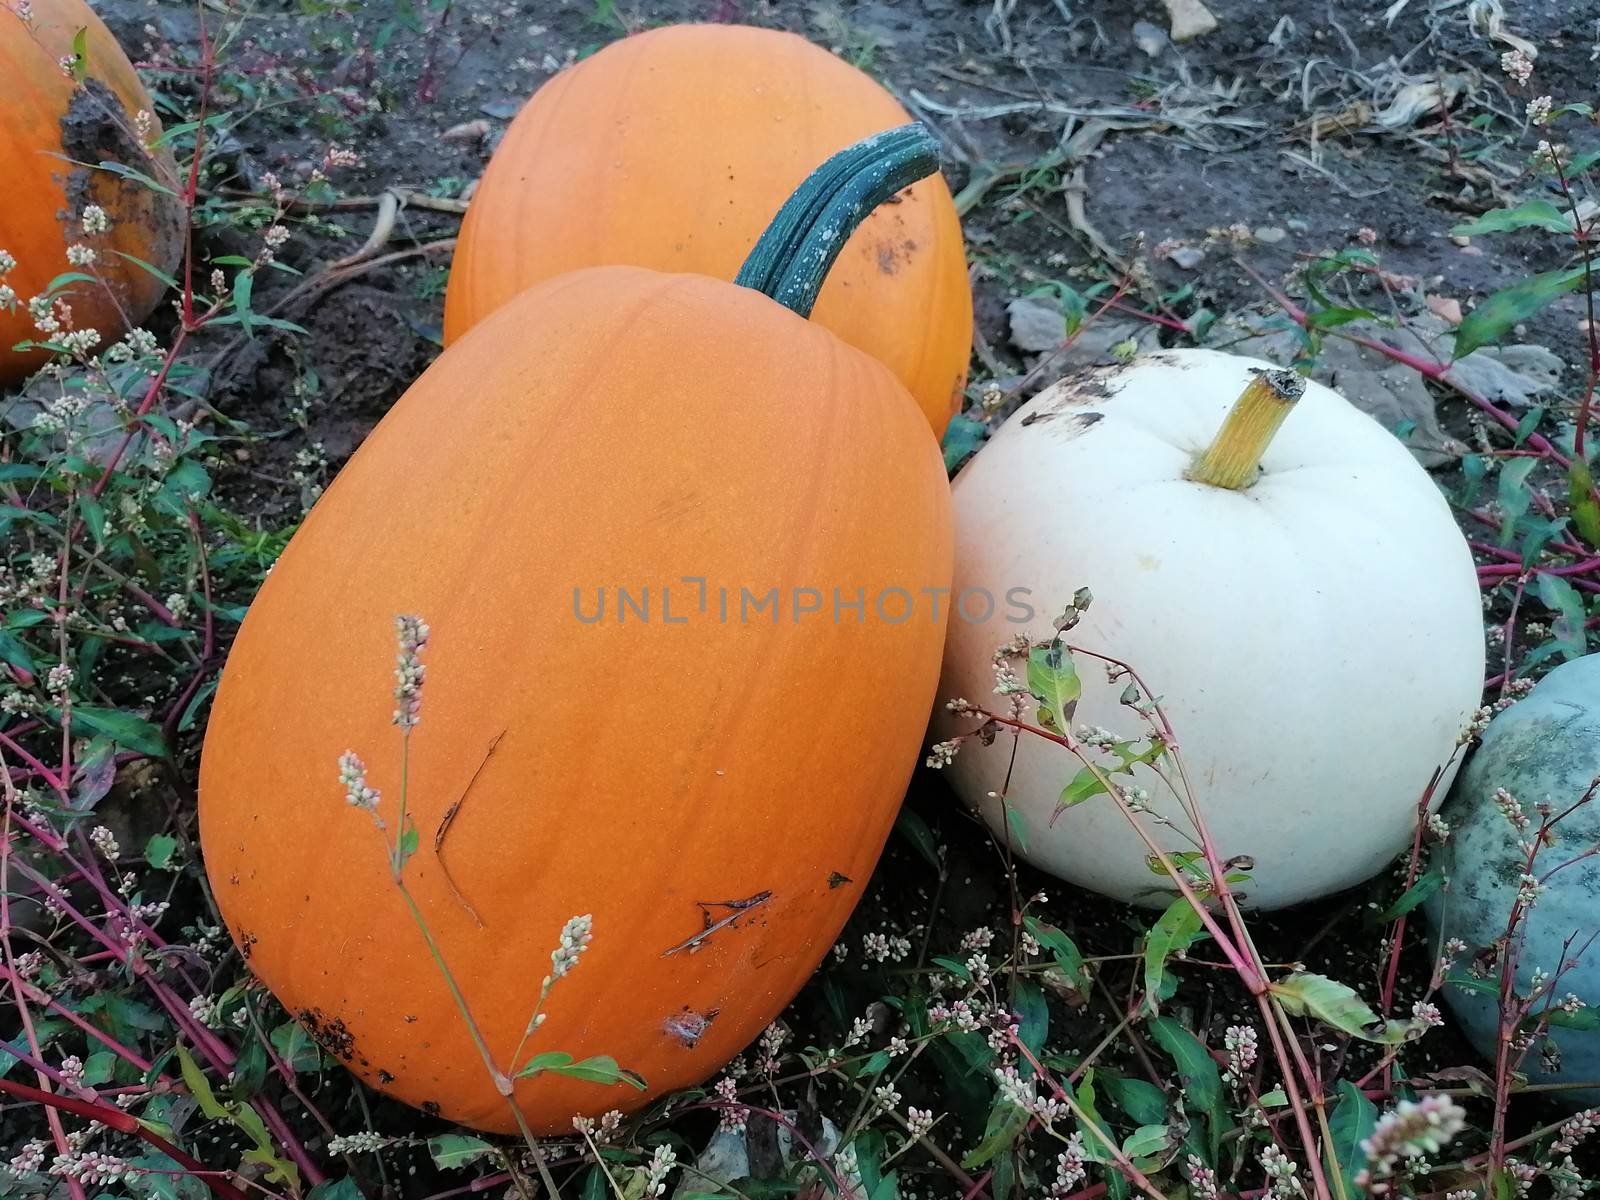 orange and white pumpkins growing in a field for halloween and pie by AndrewUK